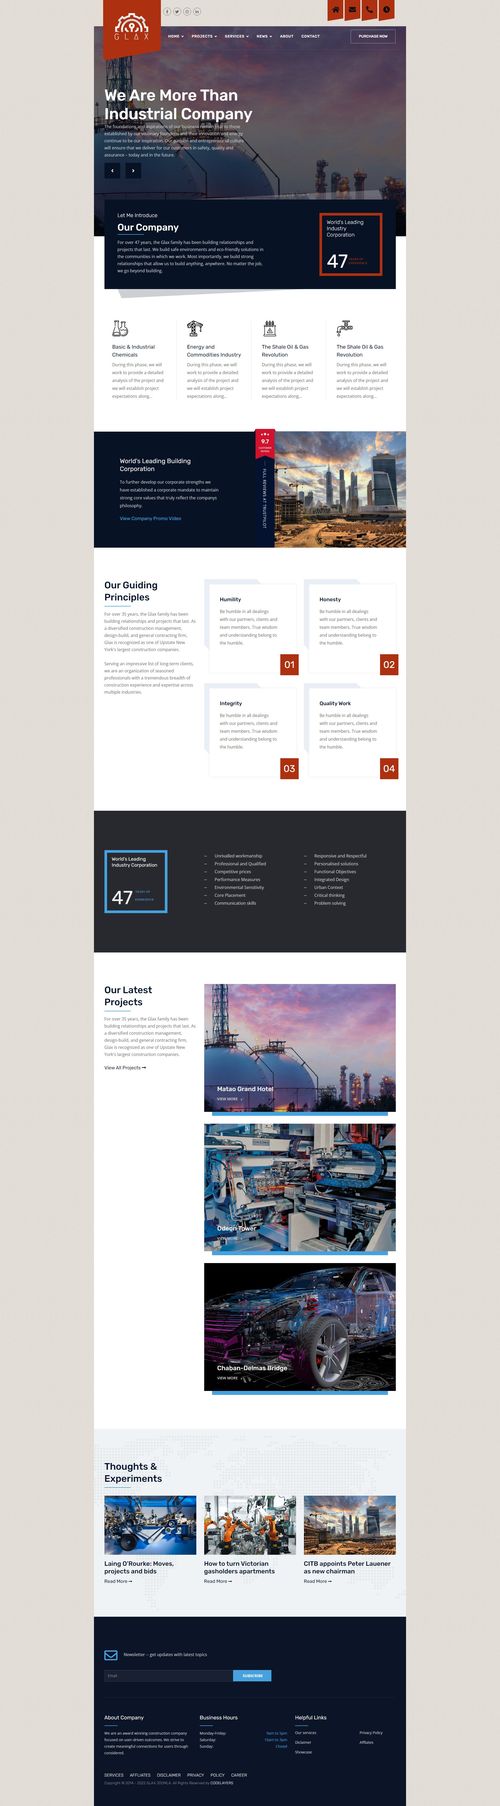 Glax - Joomla Template Modern Industry and Construction